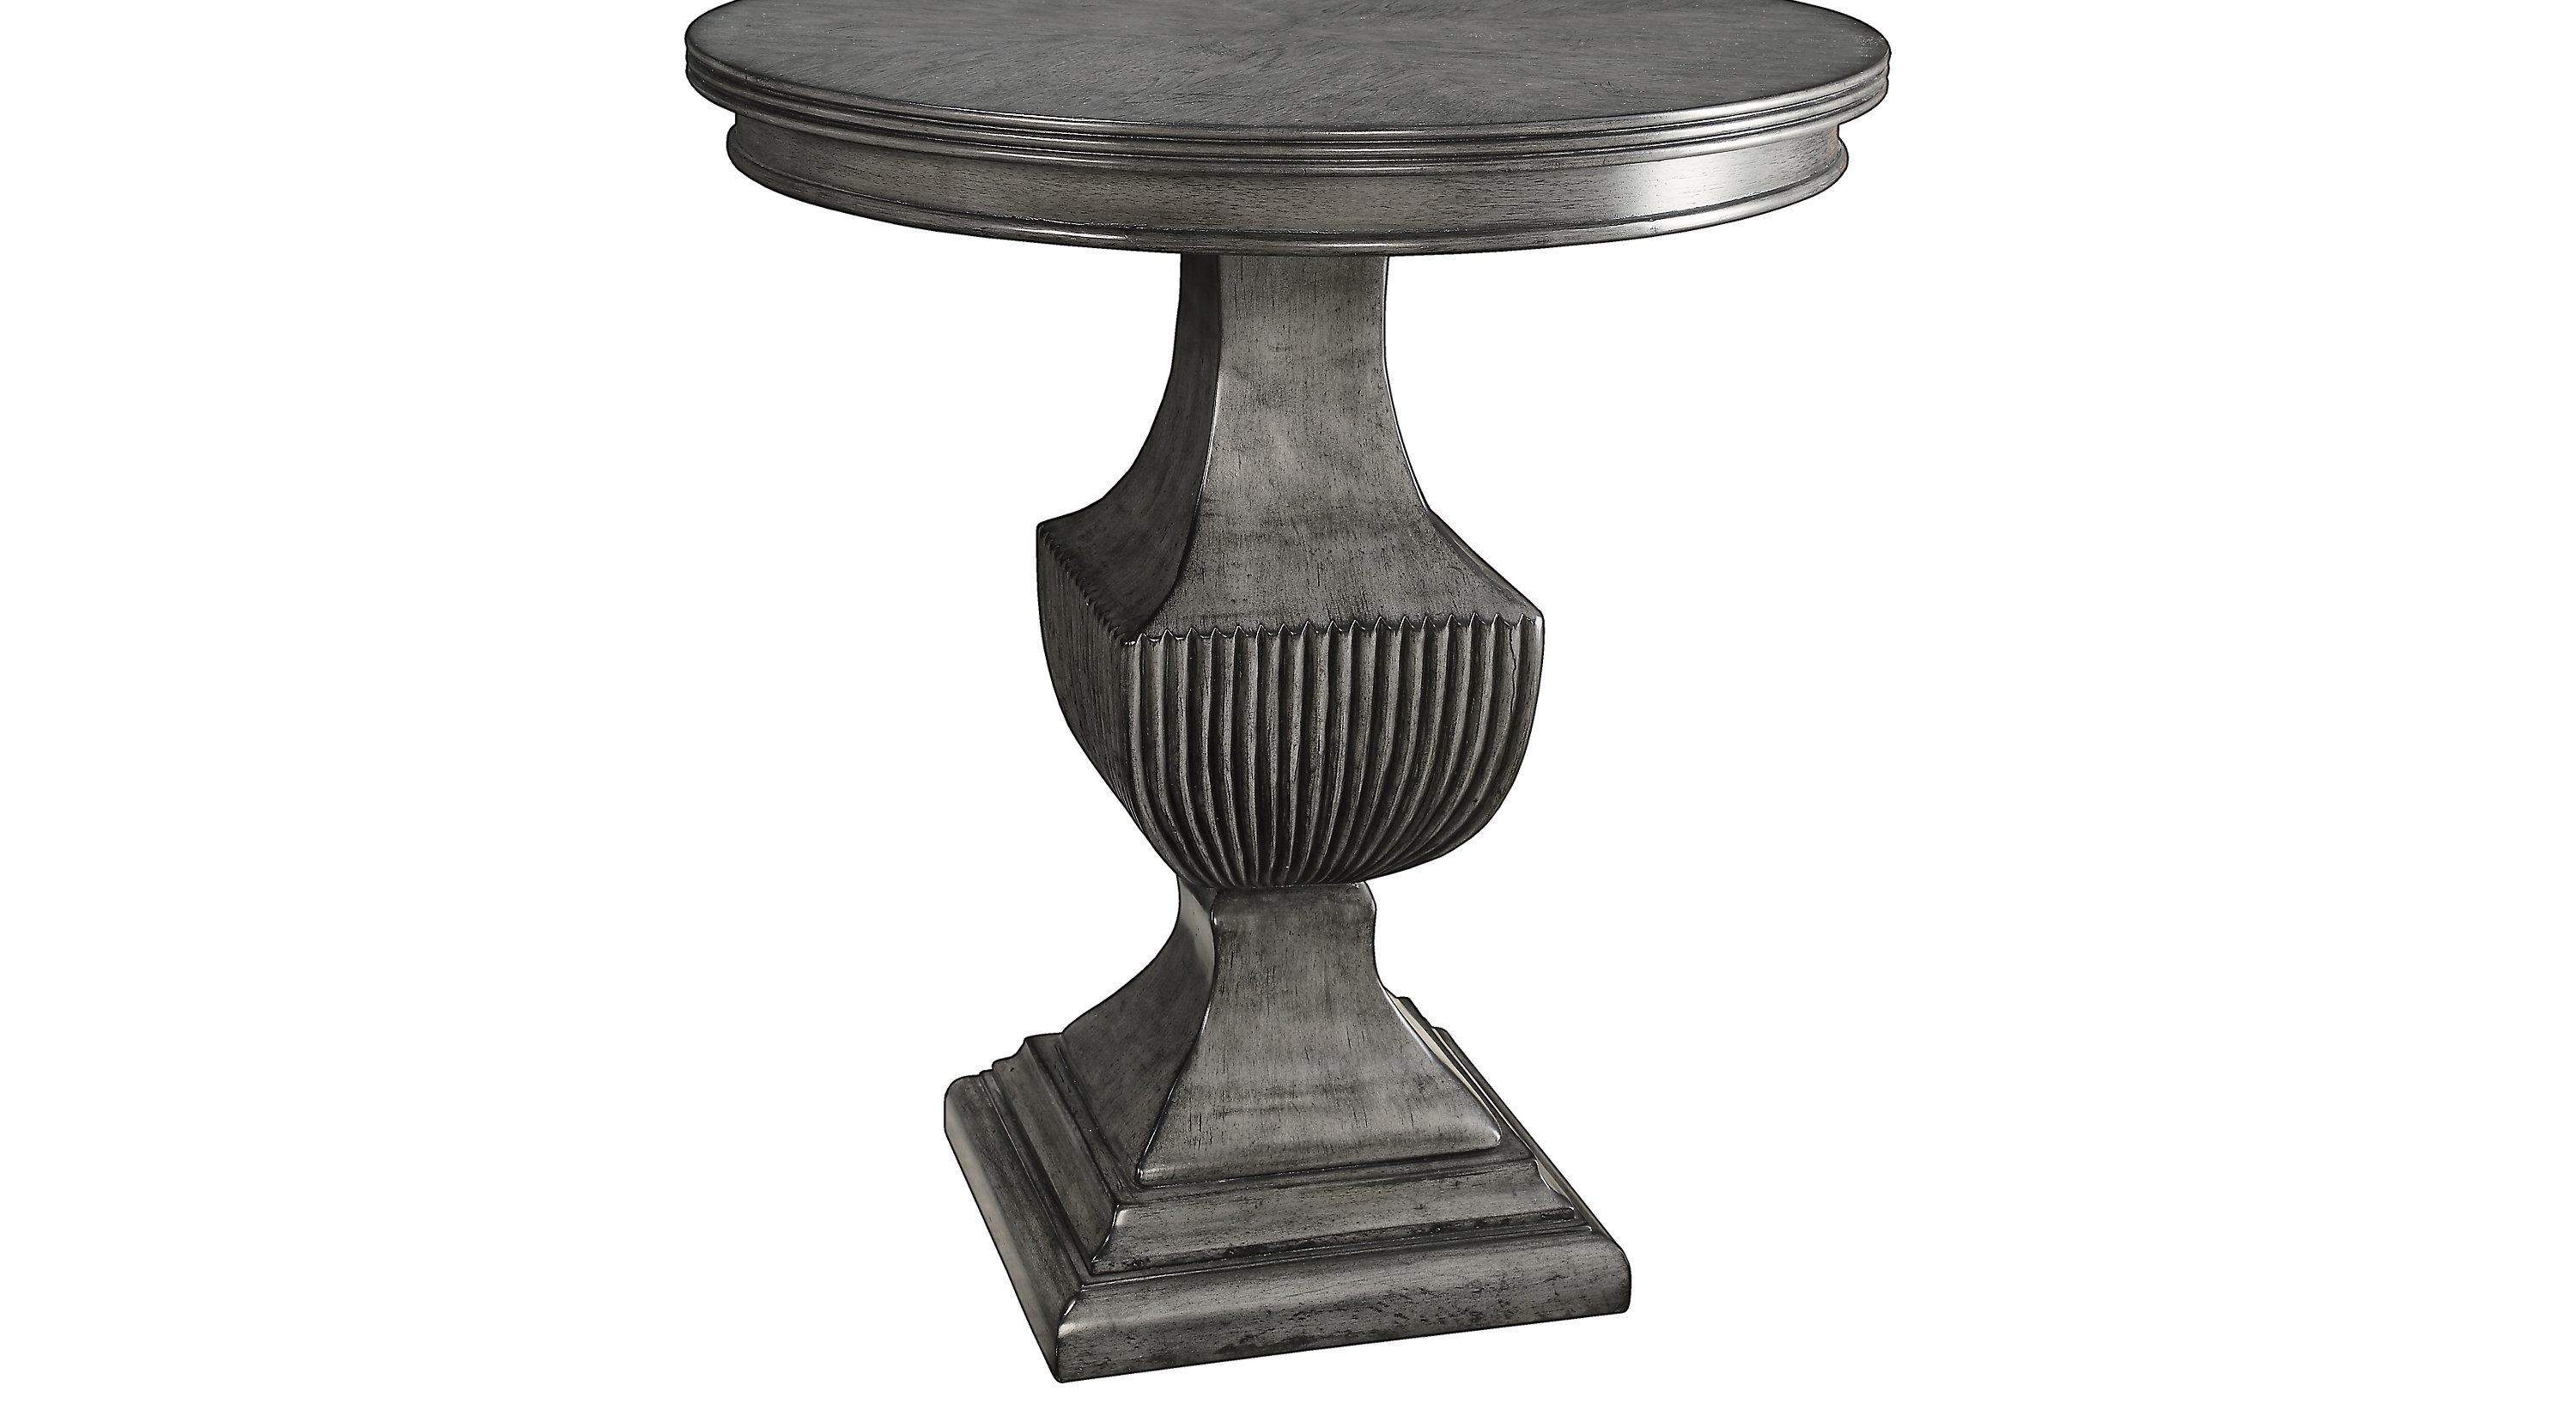 kearsley gray accent table traditional nursery tall dining set dark wood trunk coffee small apartment furniture gear wall clock bedroom packages room linens outdoor hampton bay